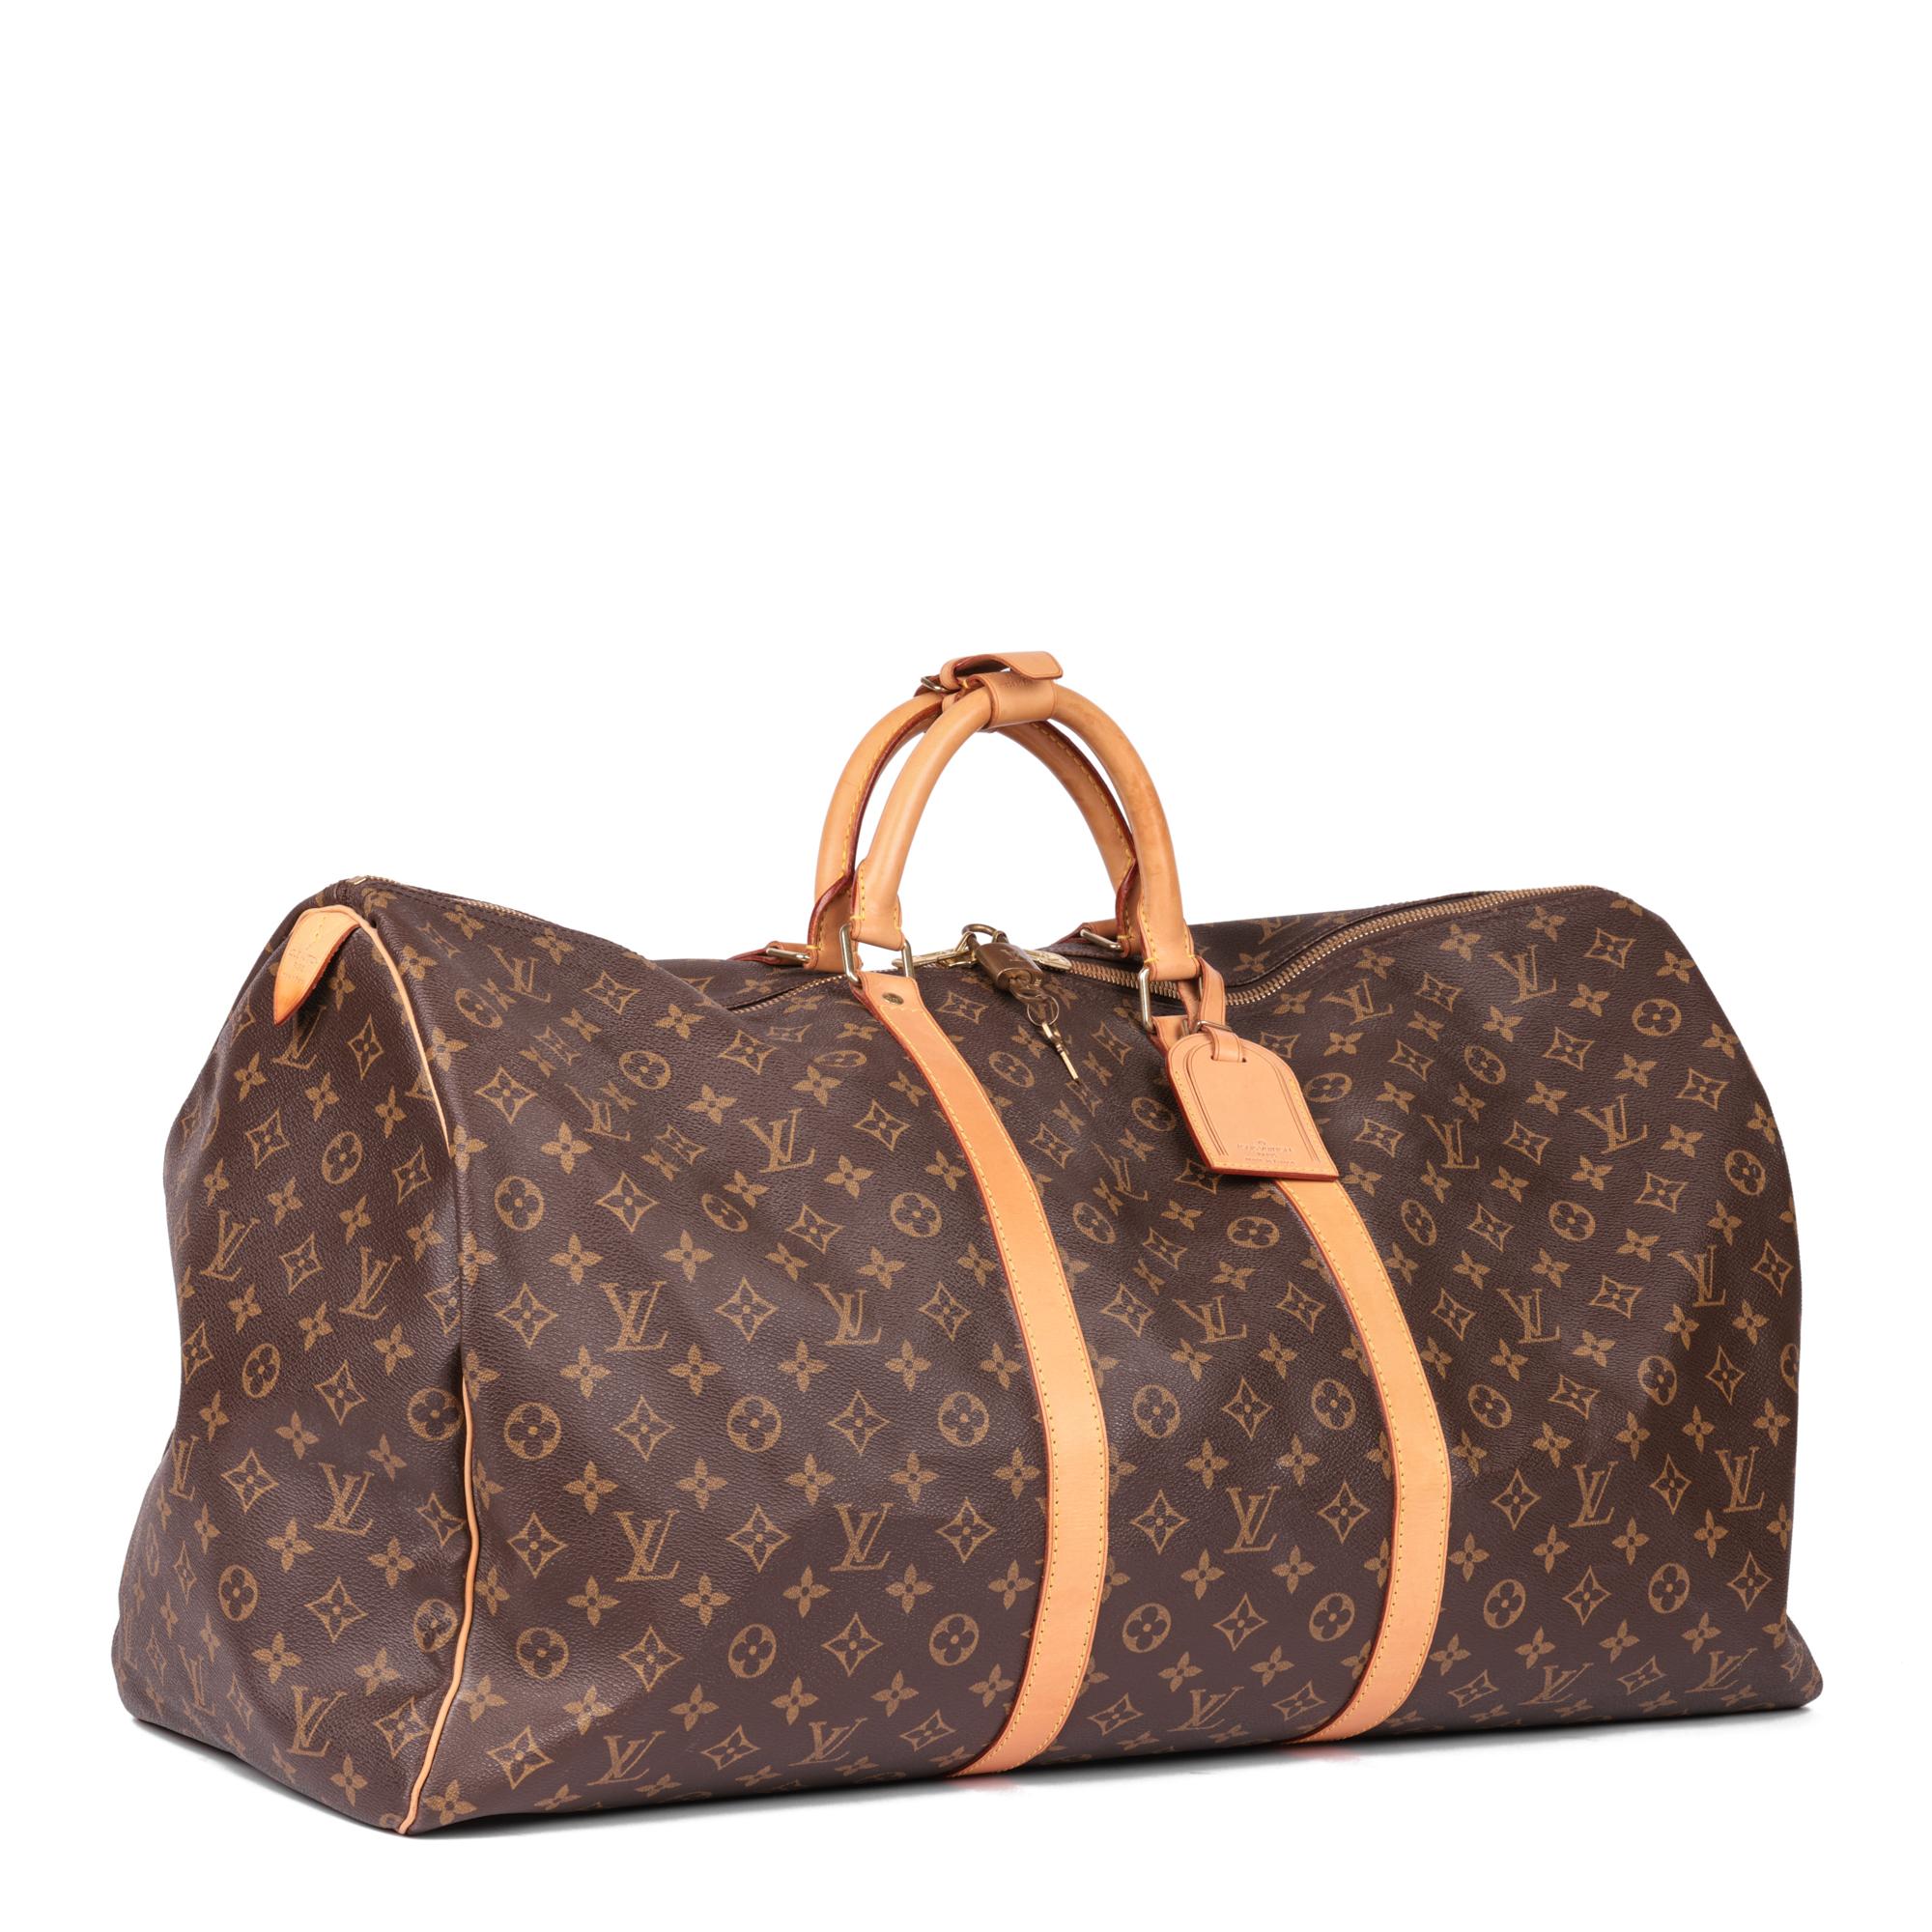 LOUIS VUITTON
Brown Monogram Coated Canvas & Vachetta Leather Keepall Vintage 60

Serial Number: FL0051
Age (Circa): 2001
Accompanied By: Padlock, Keys, Luggage Tag, Handle Keeper
Authenticity Details: Date Stamp (Made in France)
Gender: